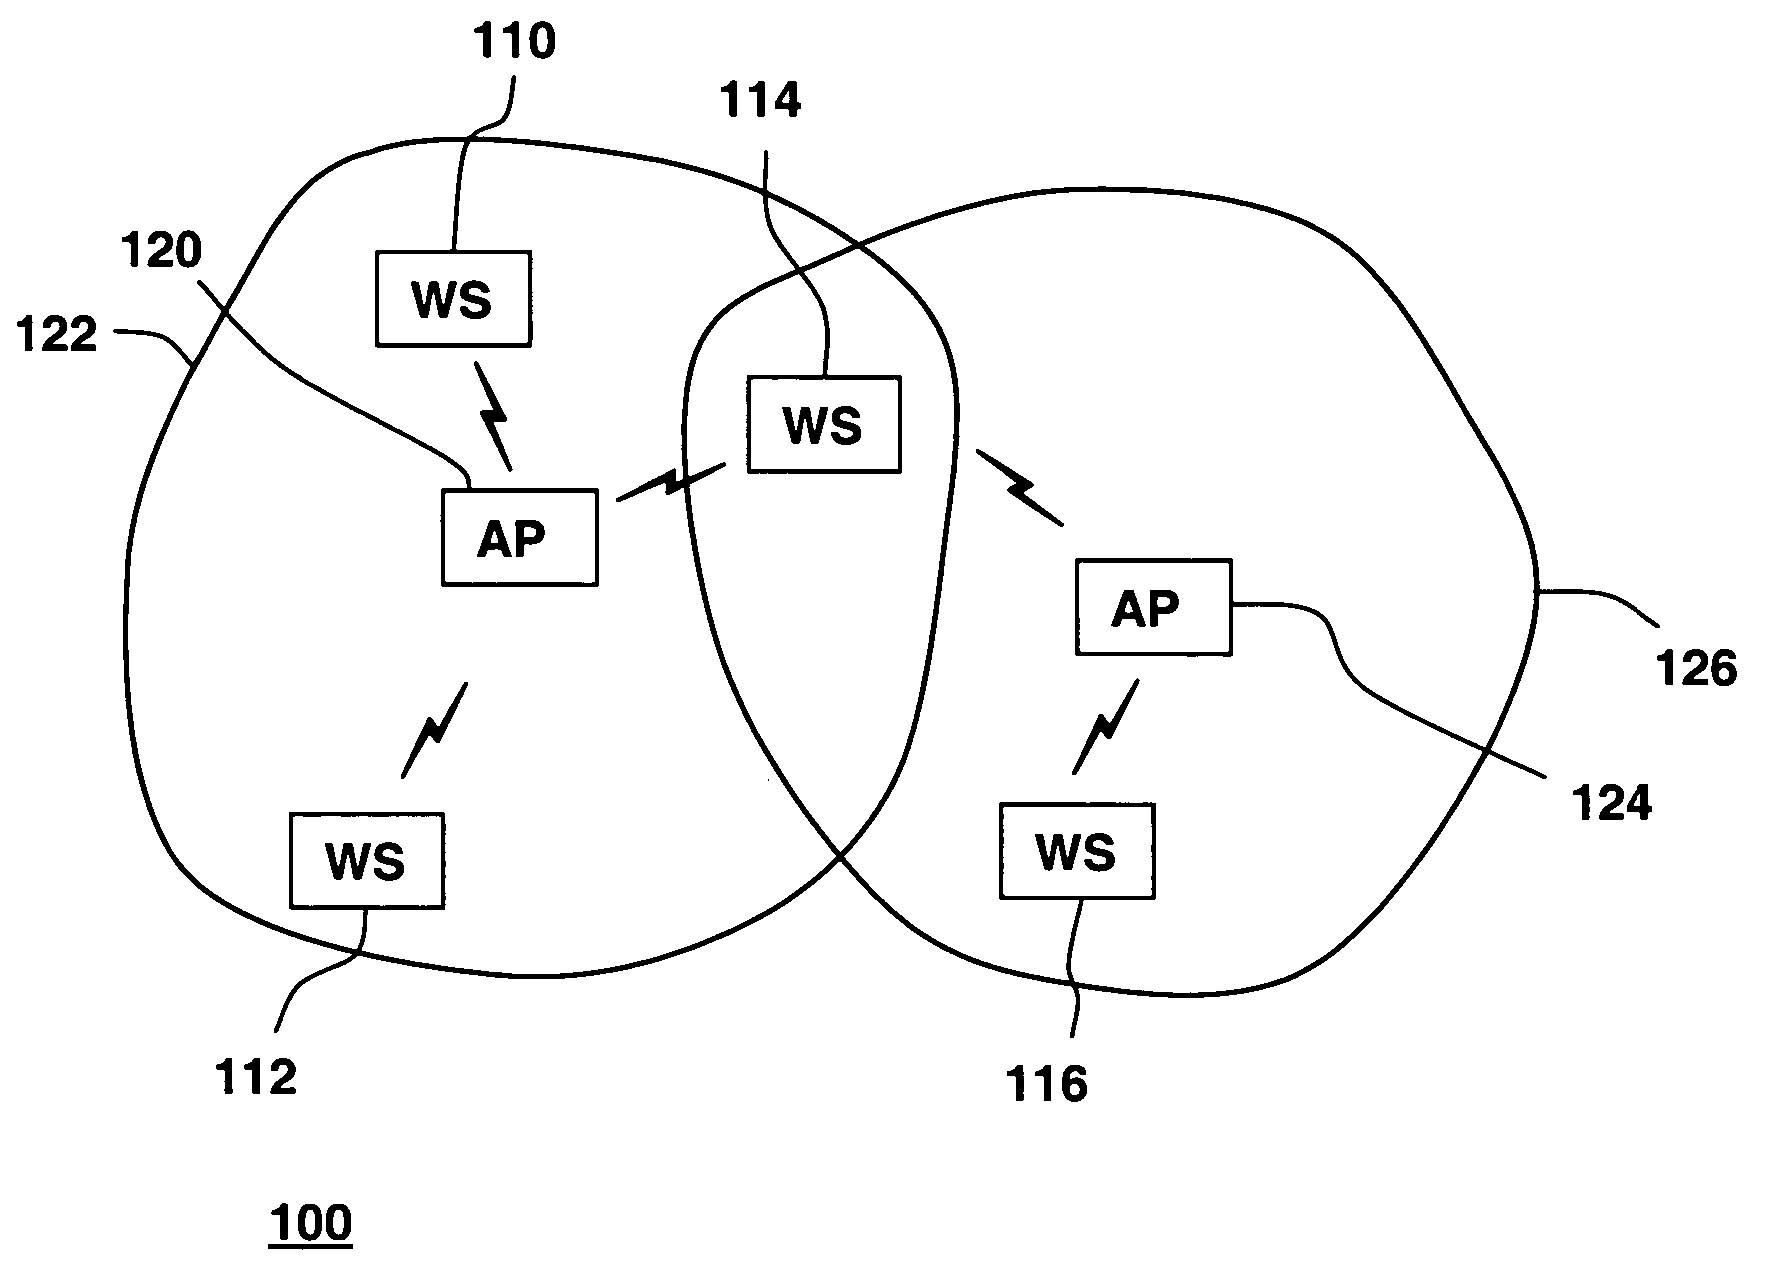 Method of scanning for beacon transmissions in a WLAN